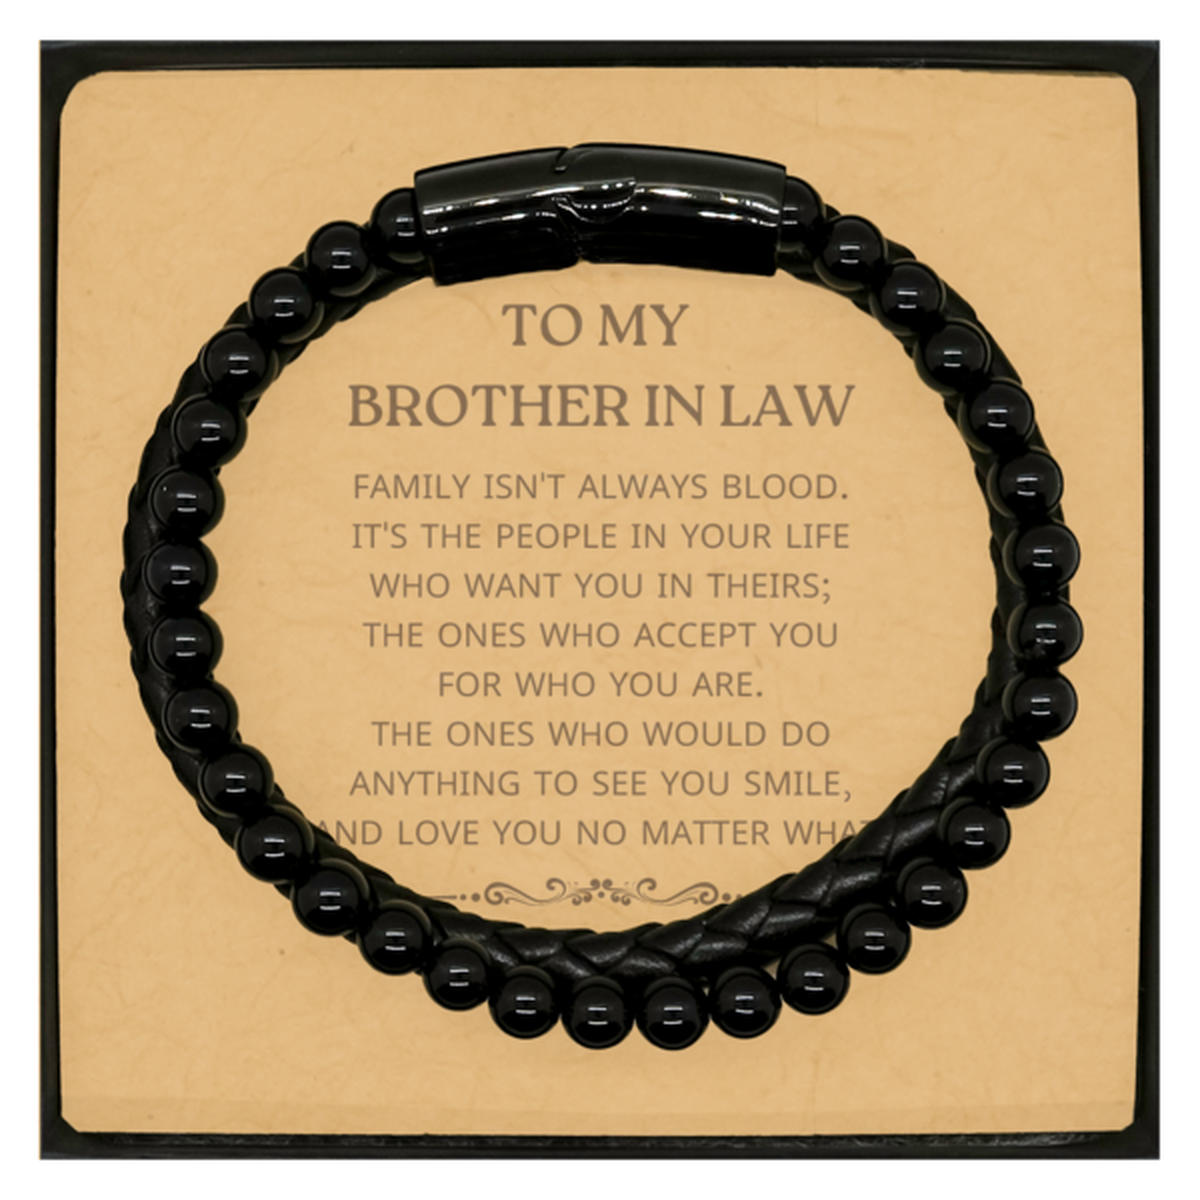 To My Brother In Law Gifts, Family isn't always blood, Brother In Law Stone Leather Bracelets, Birthday Christmas Unique Present For Brother In Law